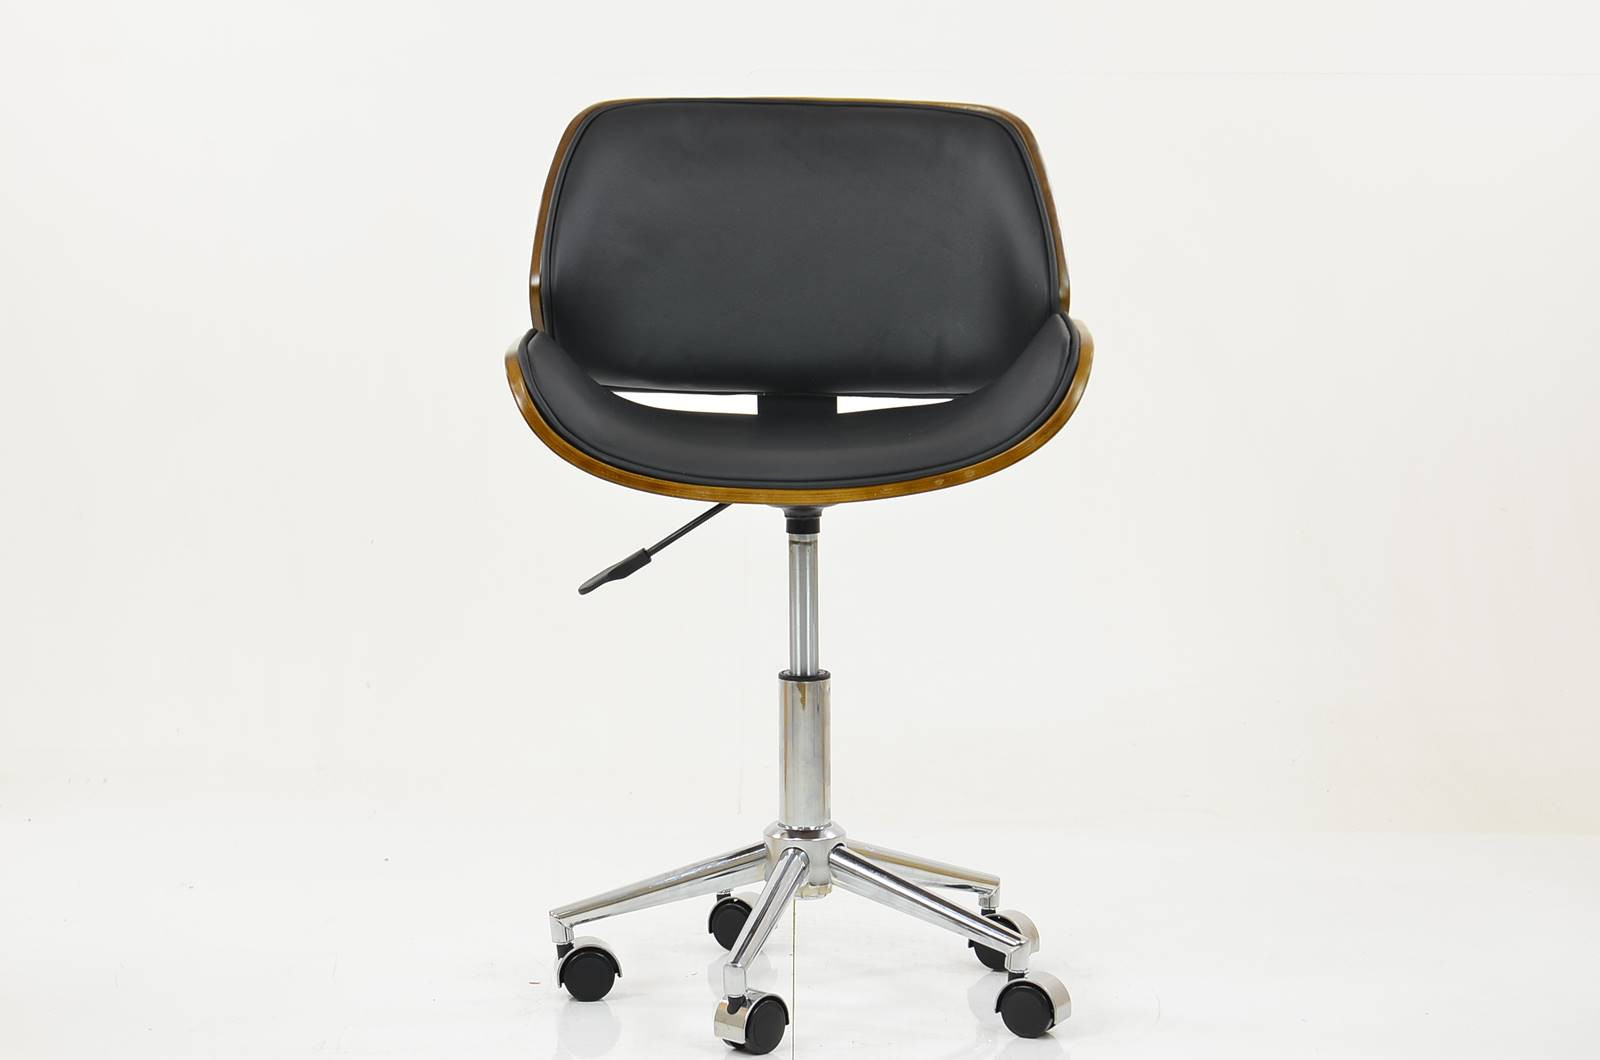 Budget Designer Wooden Shell Chair with chrome base faux leather black seat and back